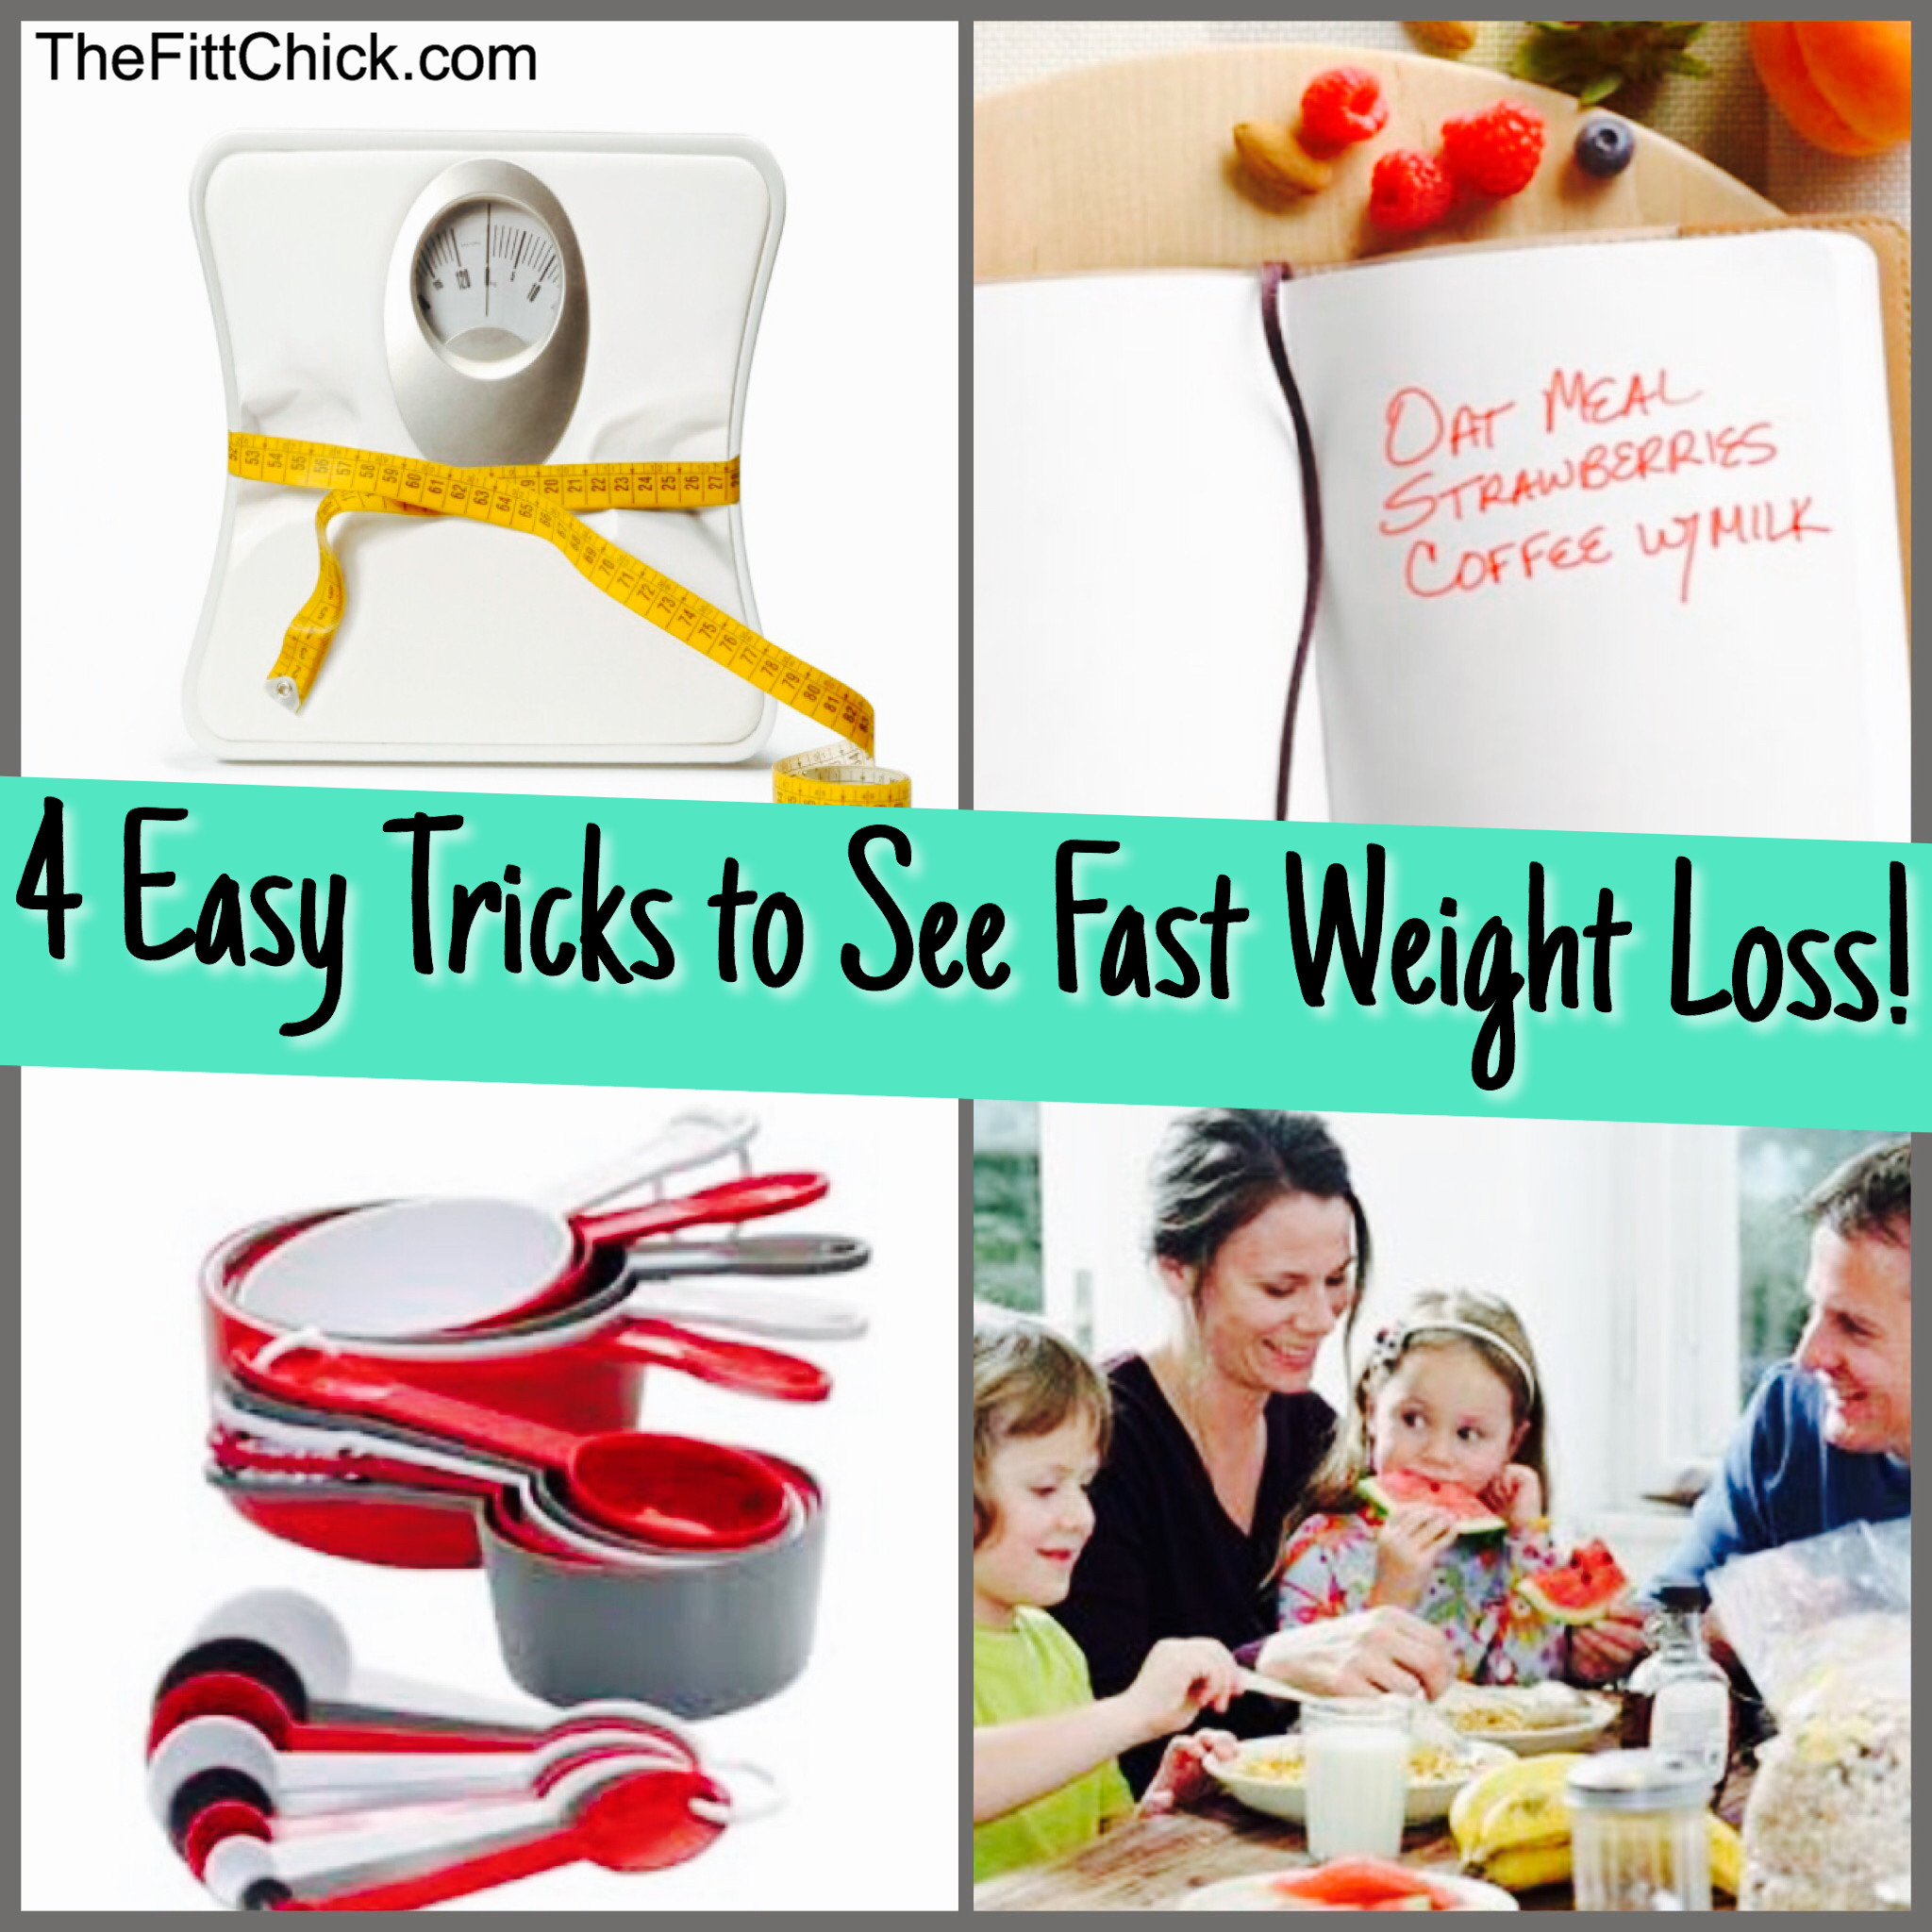 Quick Weight Loss Tricks
 4 Quick and Easy Weight Loss Tricks TheFittChick